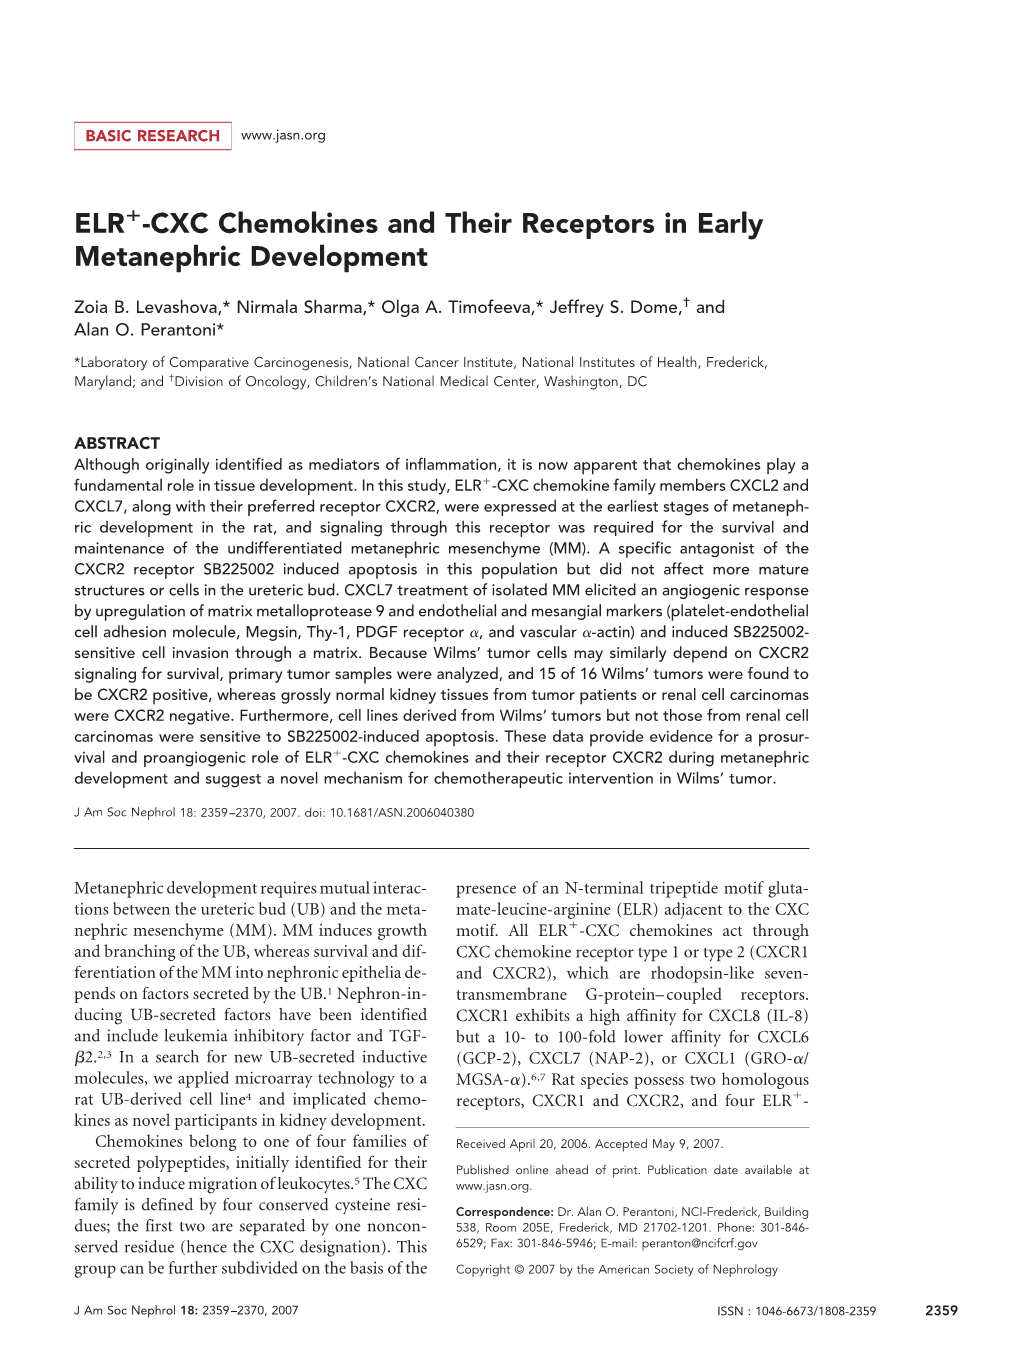 CXC Chemokines and Their Receptors in Early Metanephric Development